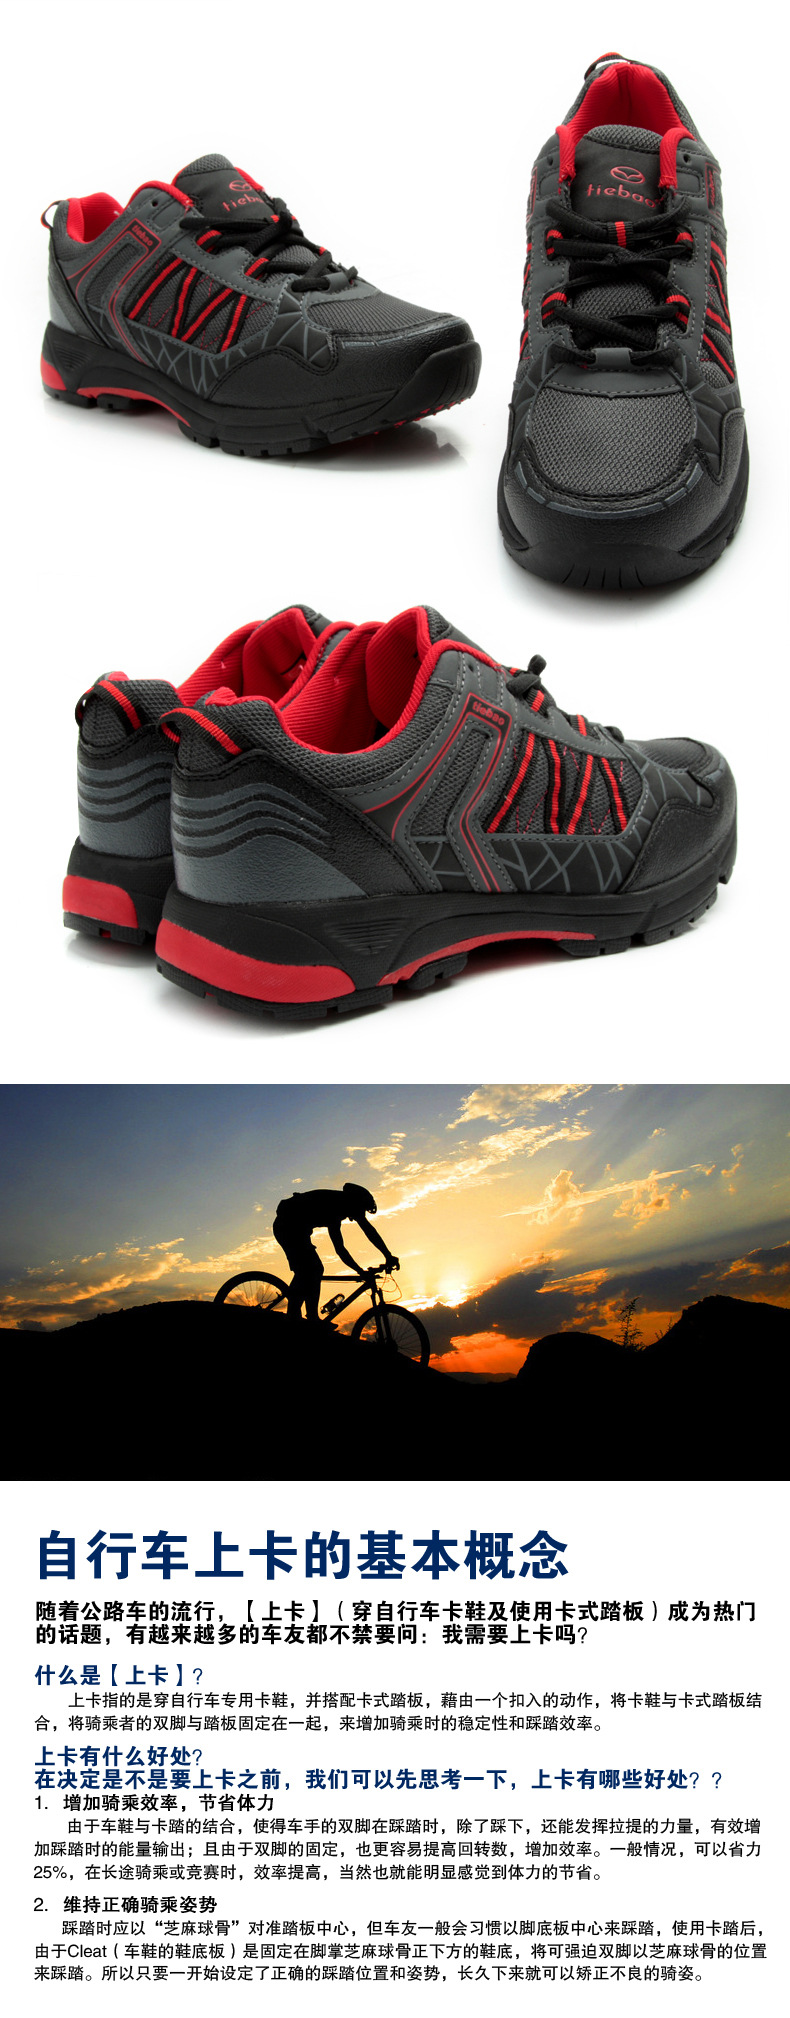 Chaussures pour cyclistes - Ref 890331 Image 8